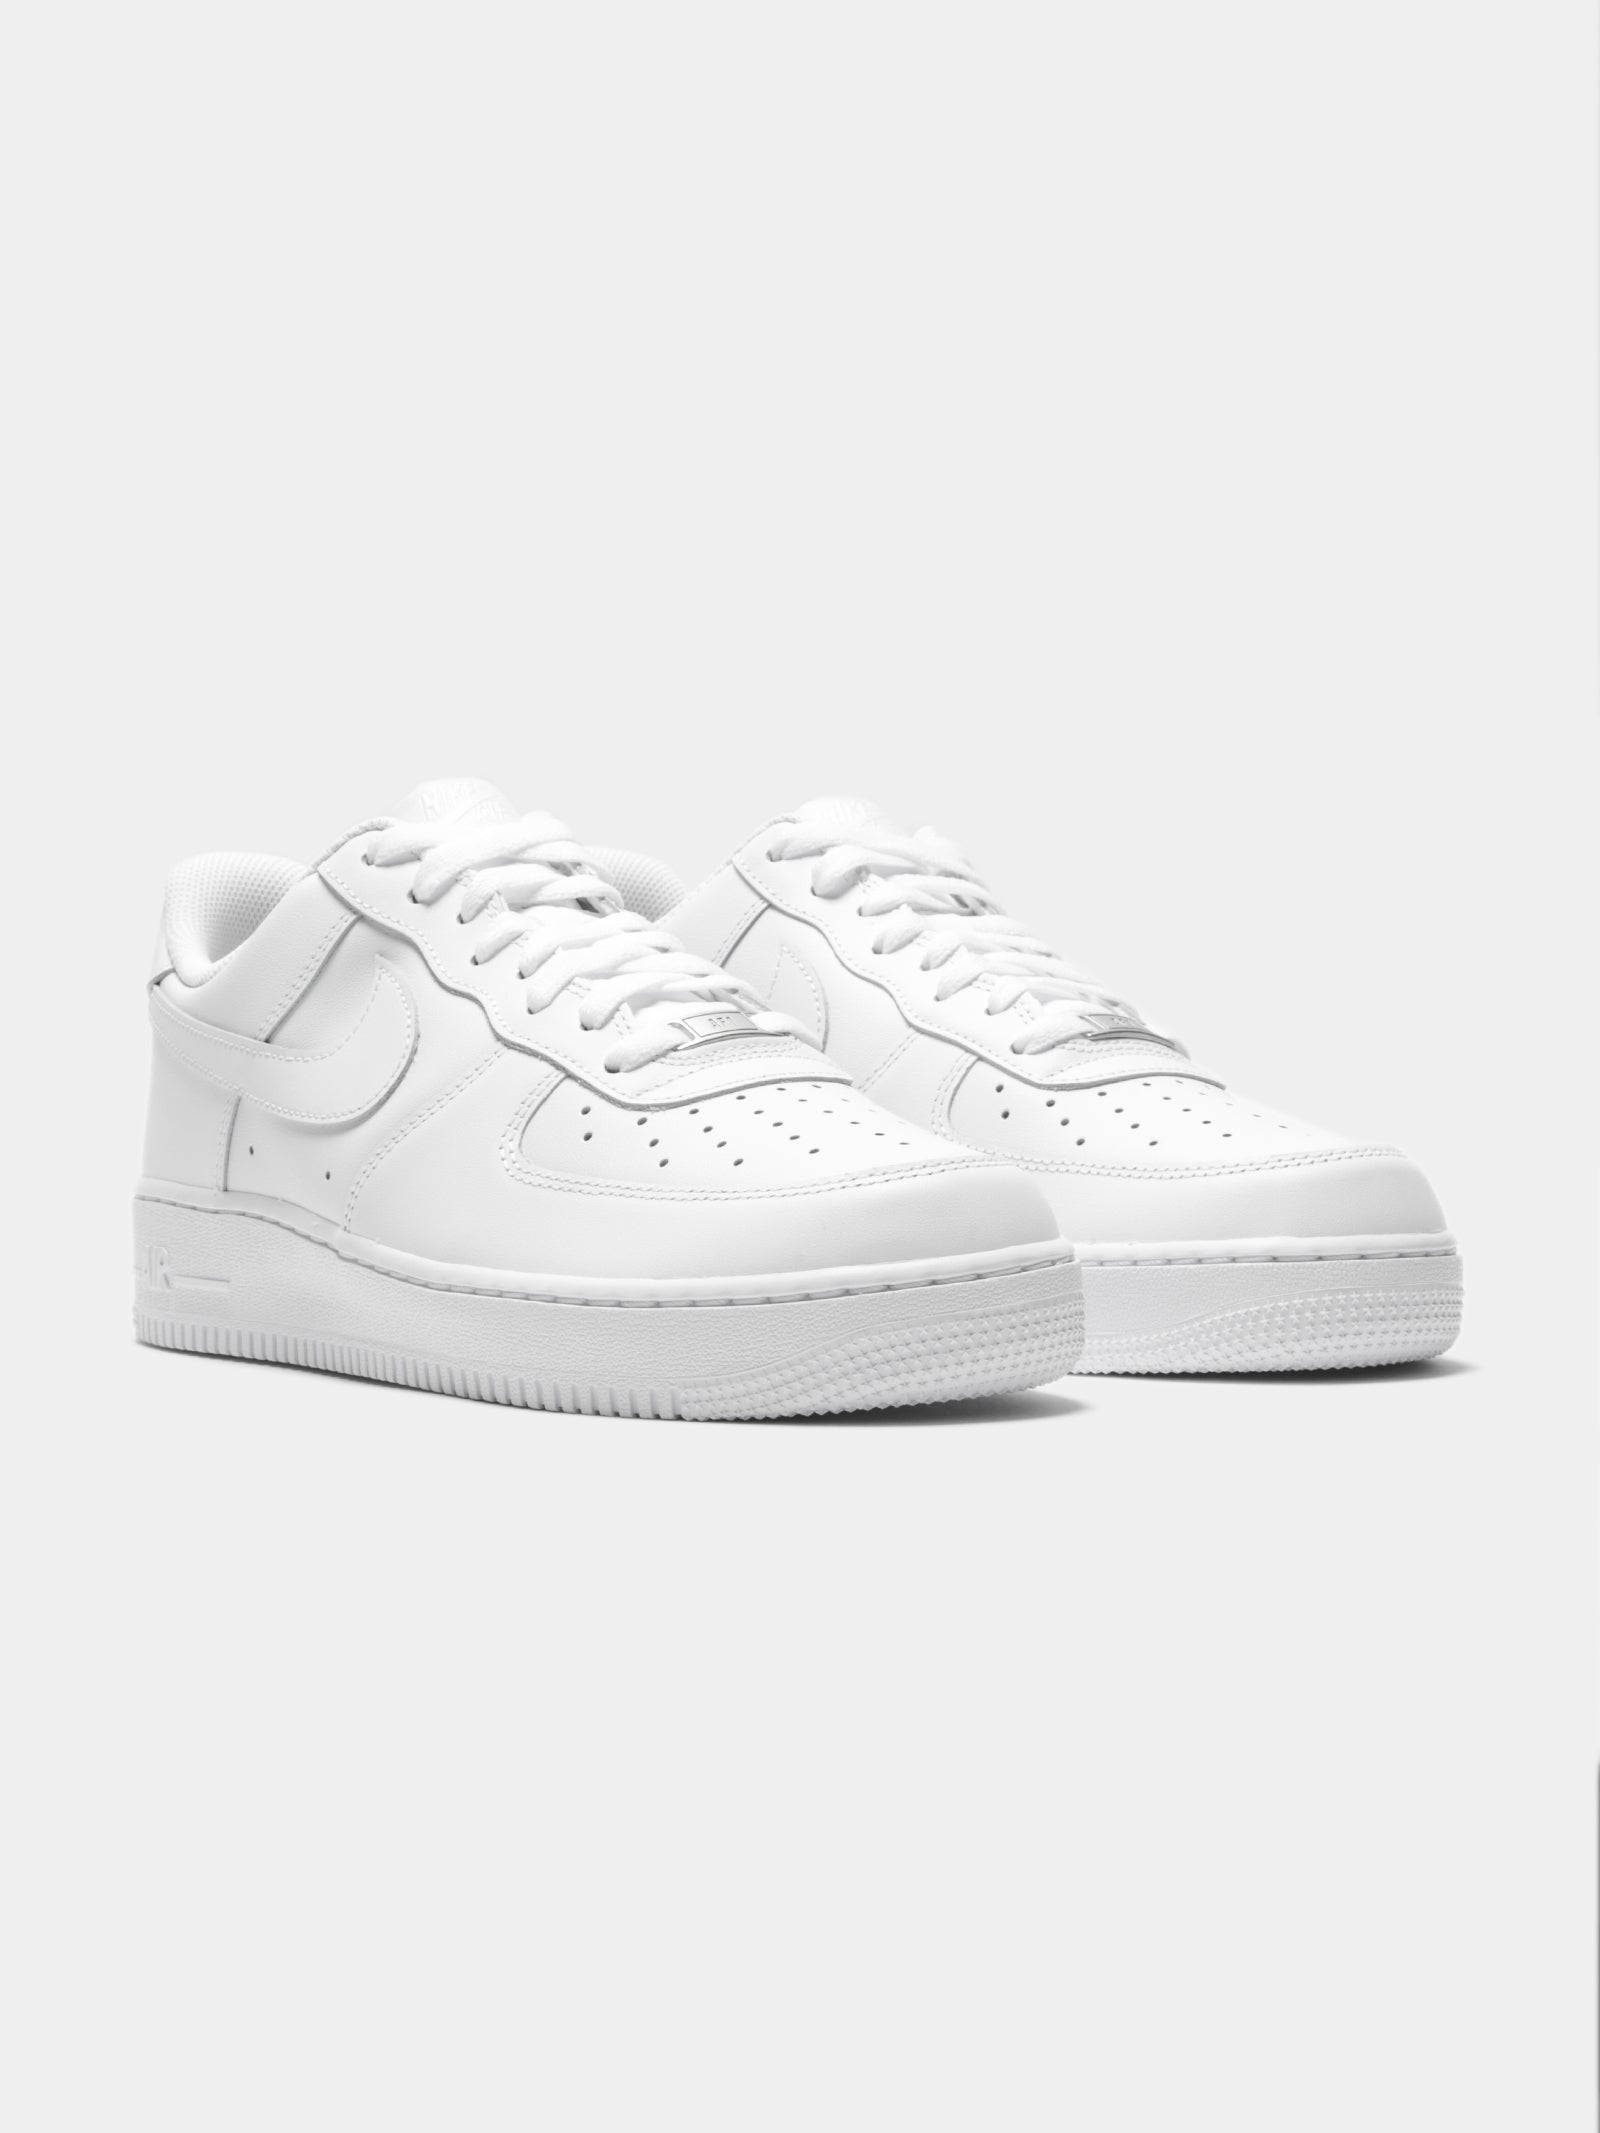 Womens Air Force 1 '07 Sneakers in Black & White - Glue Store